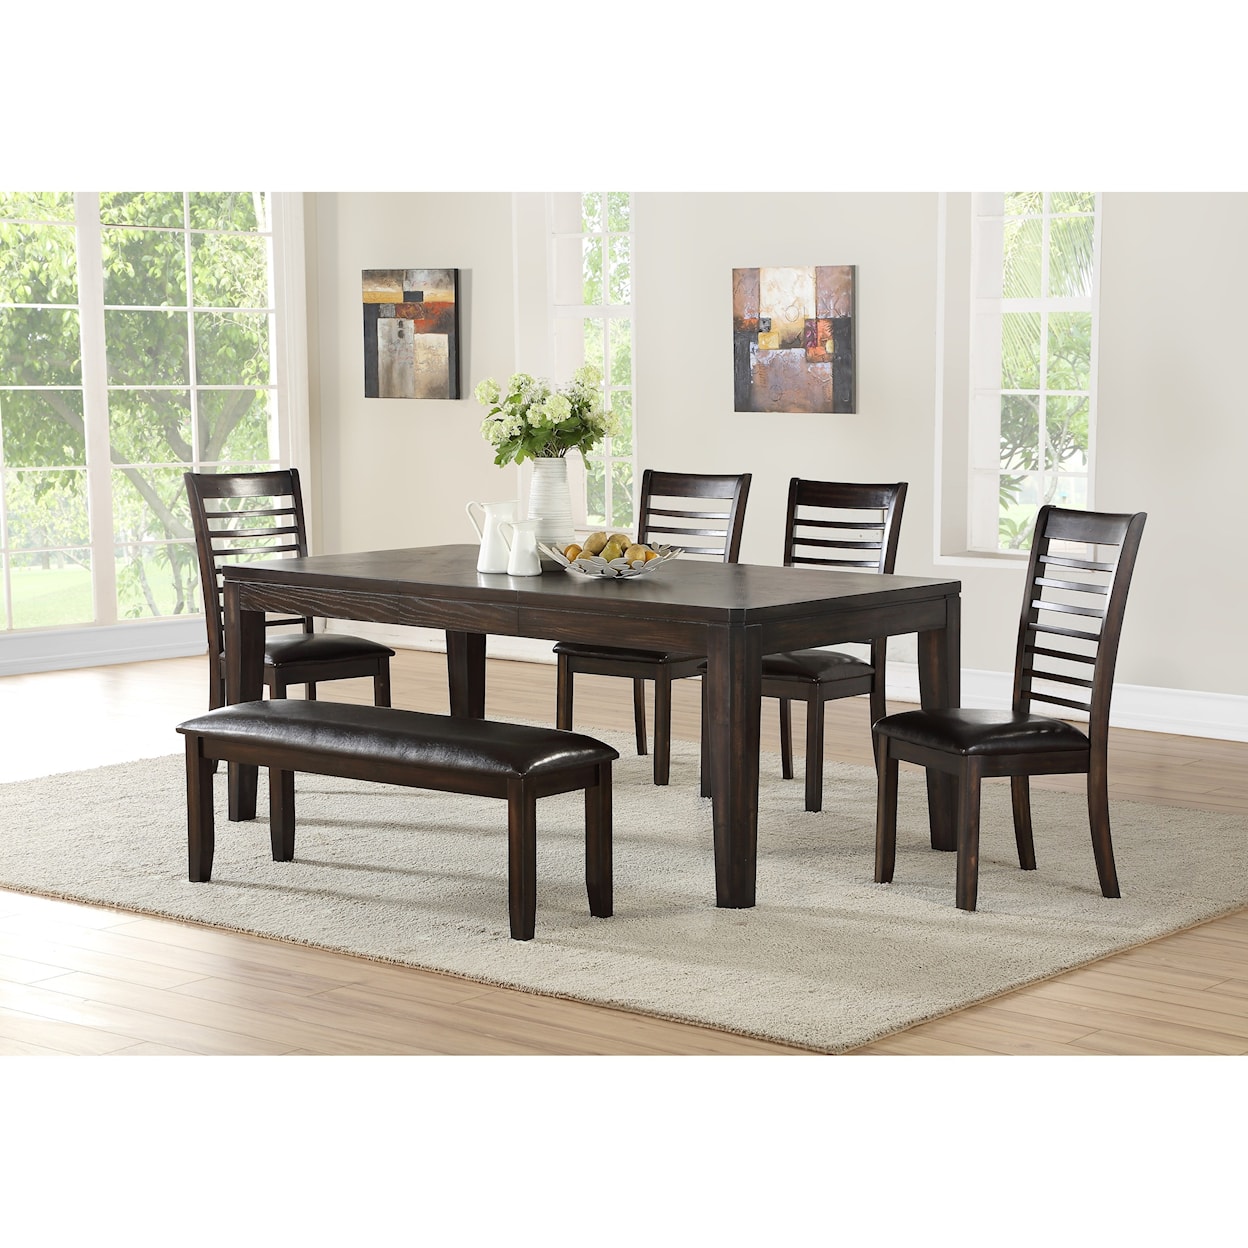 Steve Silver Ally 6 Piece Table and Chair Set with Bench